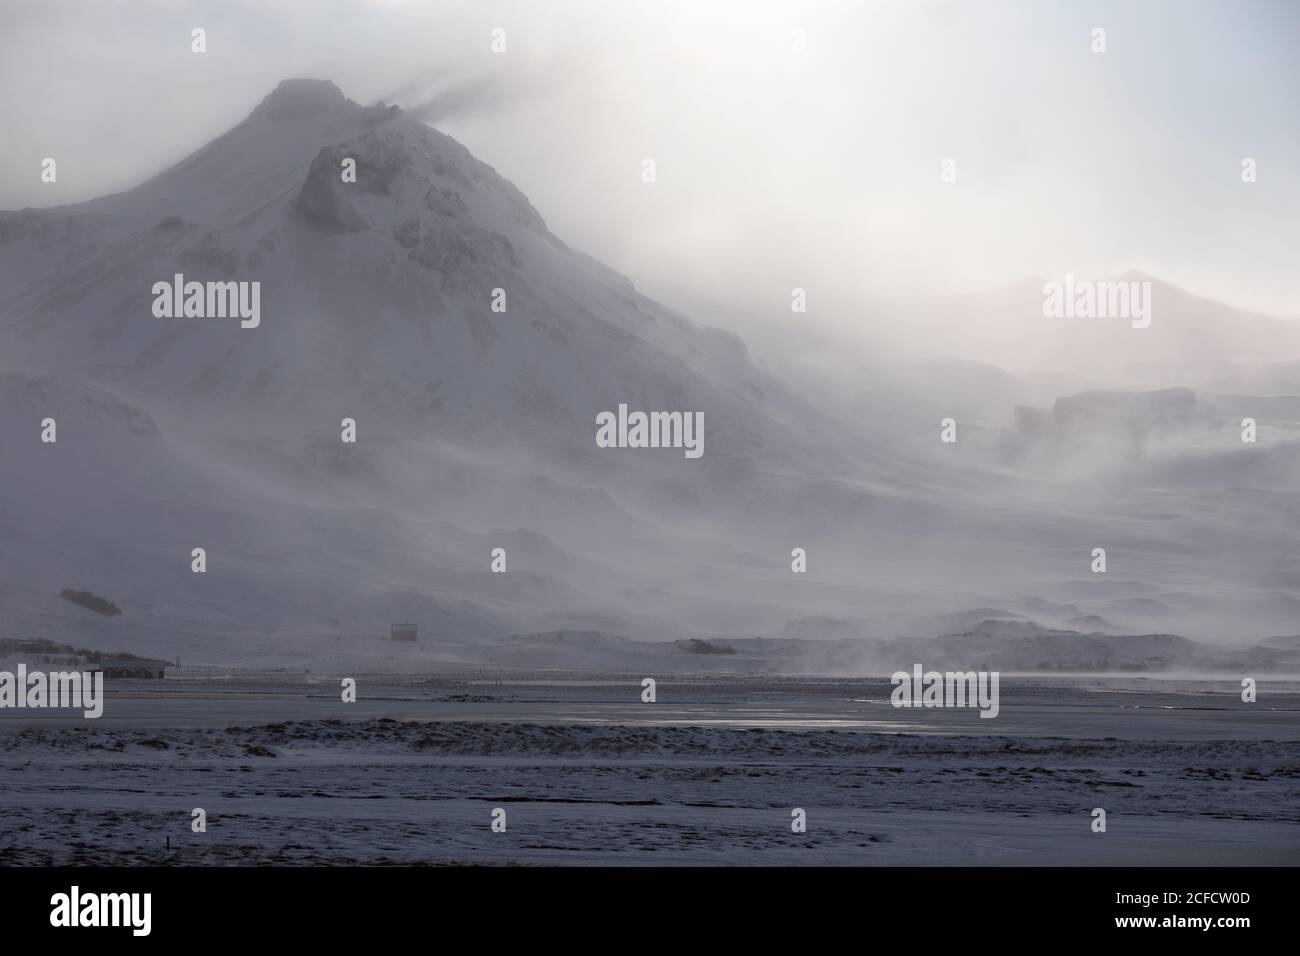 Severe wild landscape of snow capped volcano and mountain range during blizzard in winter day in Iceland Stock Photo